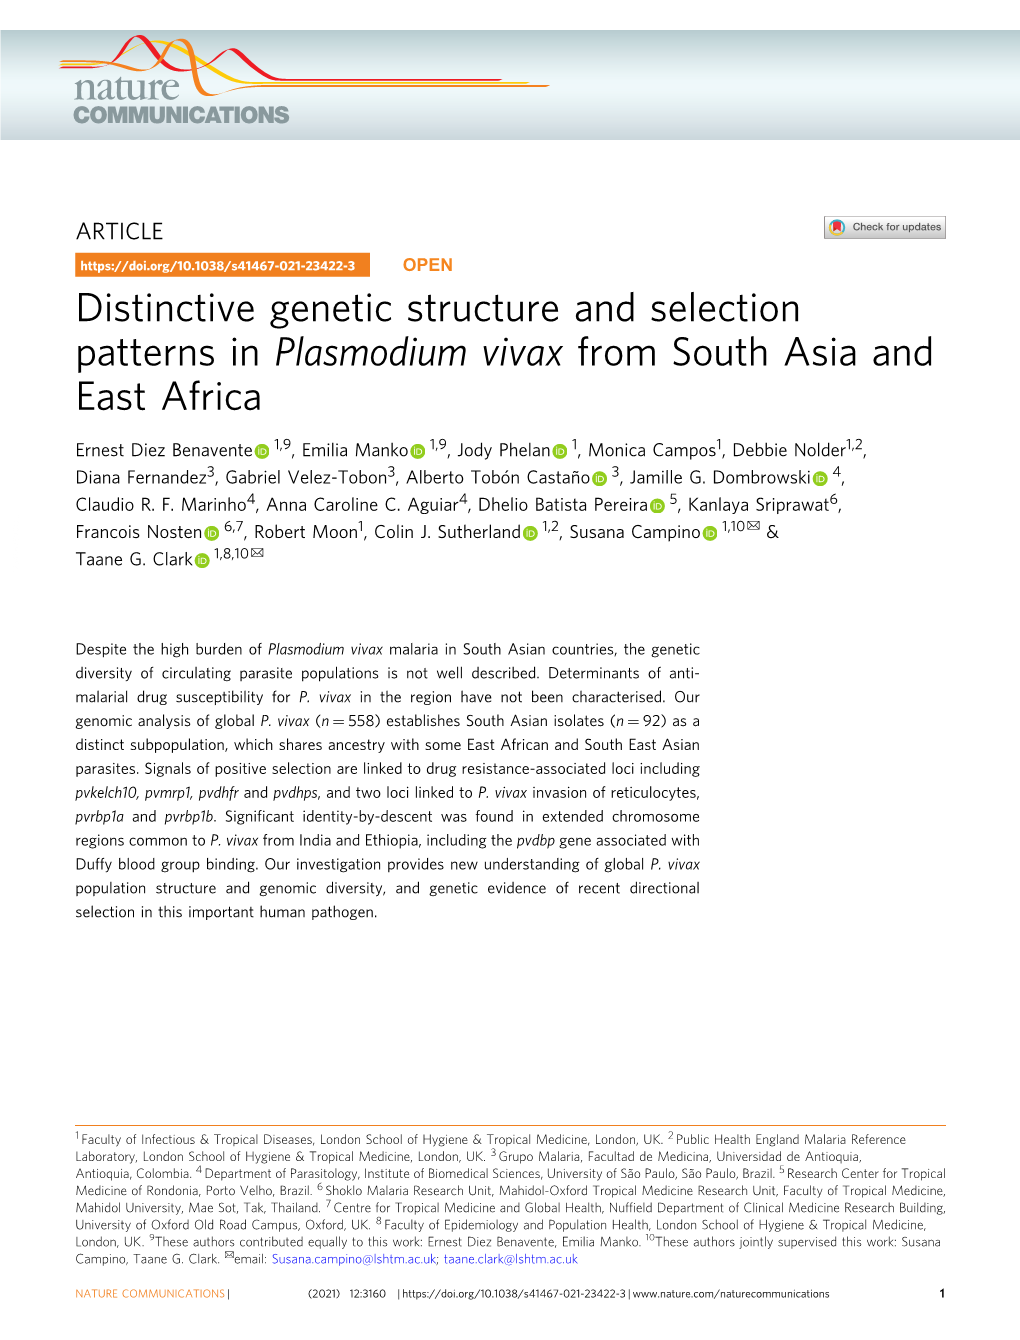 Plasmodium Vivax from South Asia and East Africa